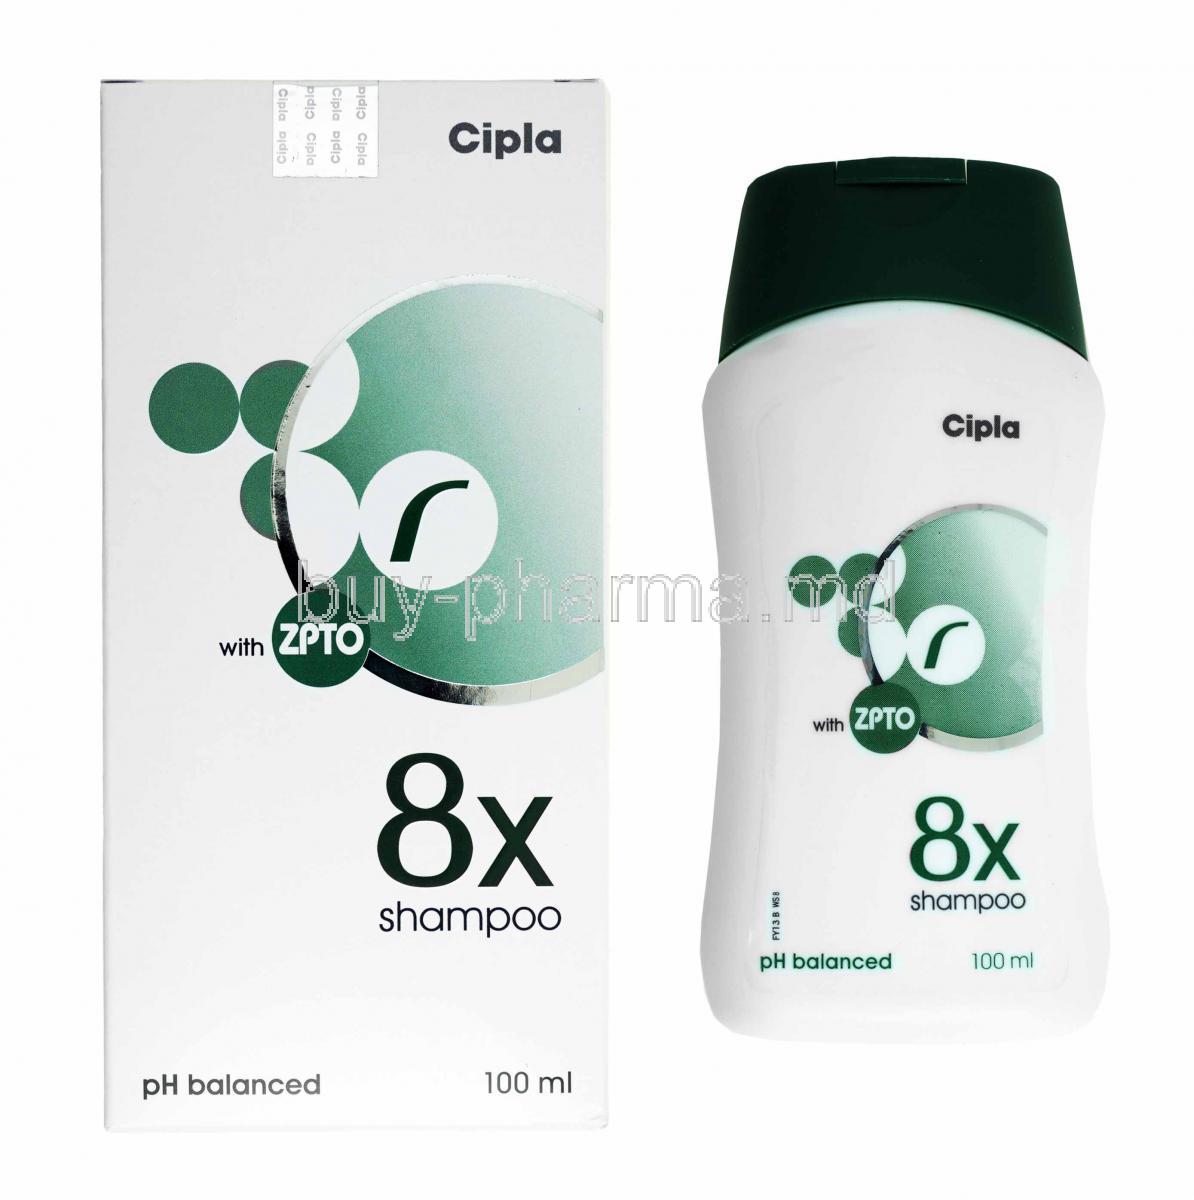 8X Shampoo, Ciclopirox and Zinc pyrithione box and bottle